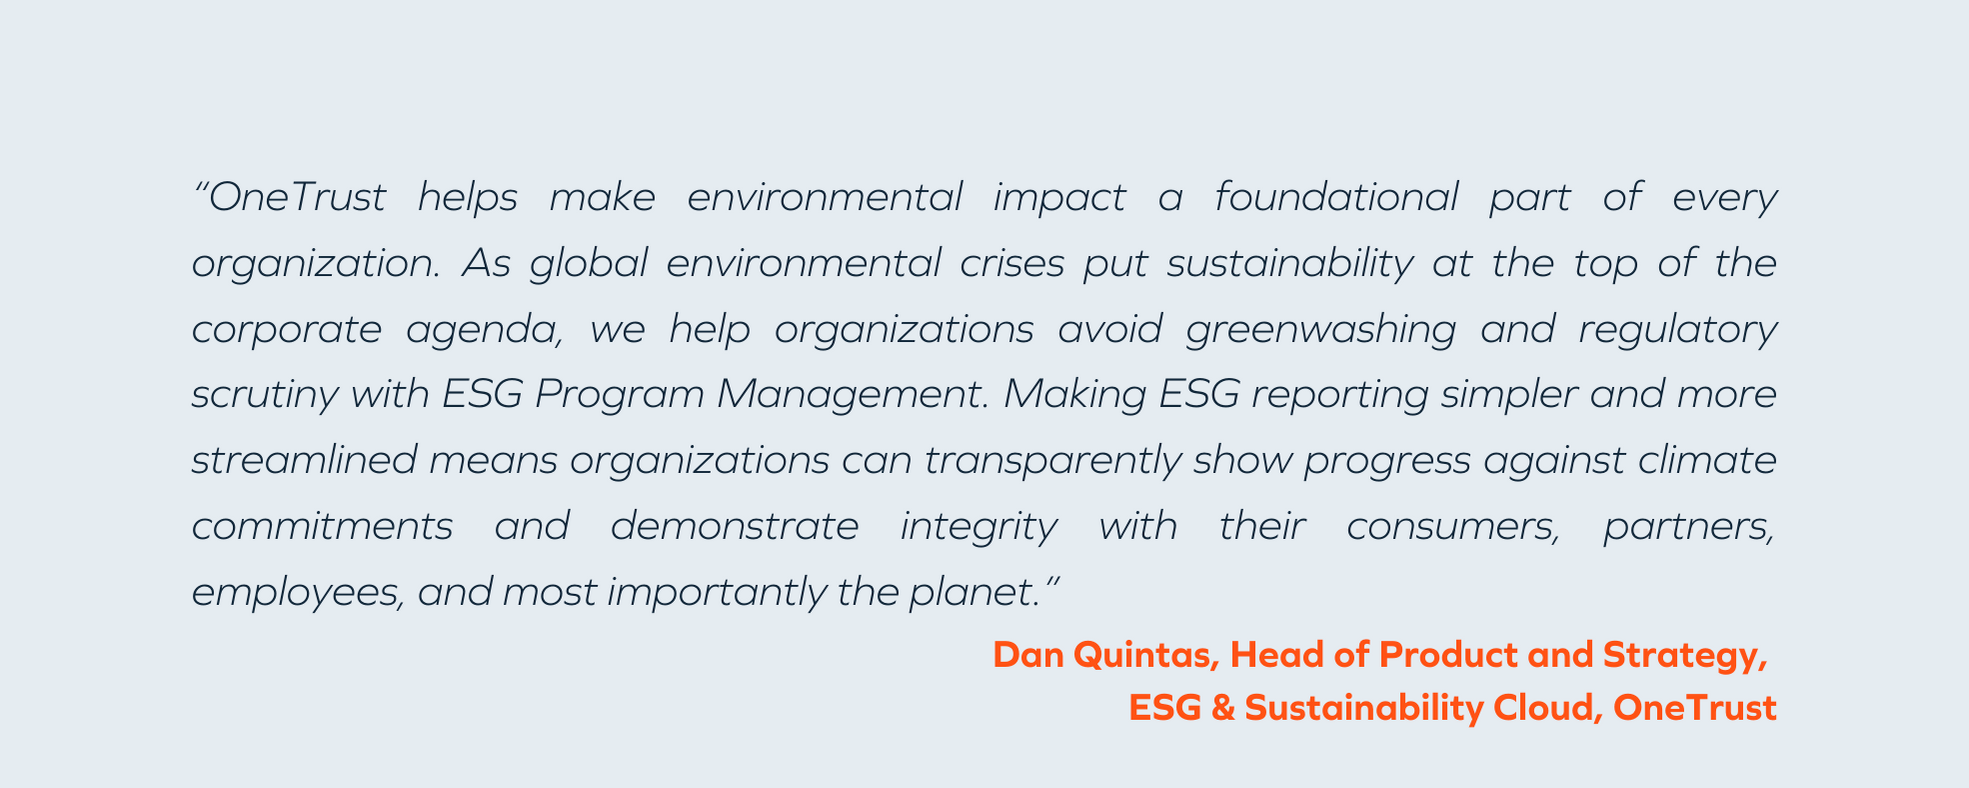 Dan Quintas, Head of Product and Strategy, ESG & Sustainability Cloud, OneTrust